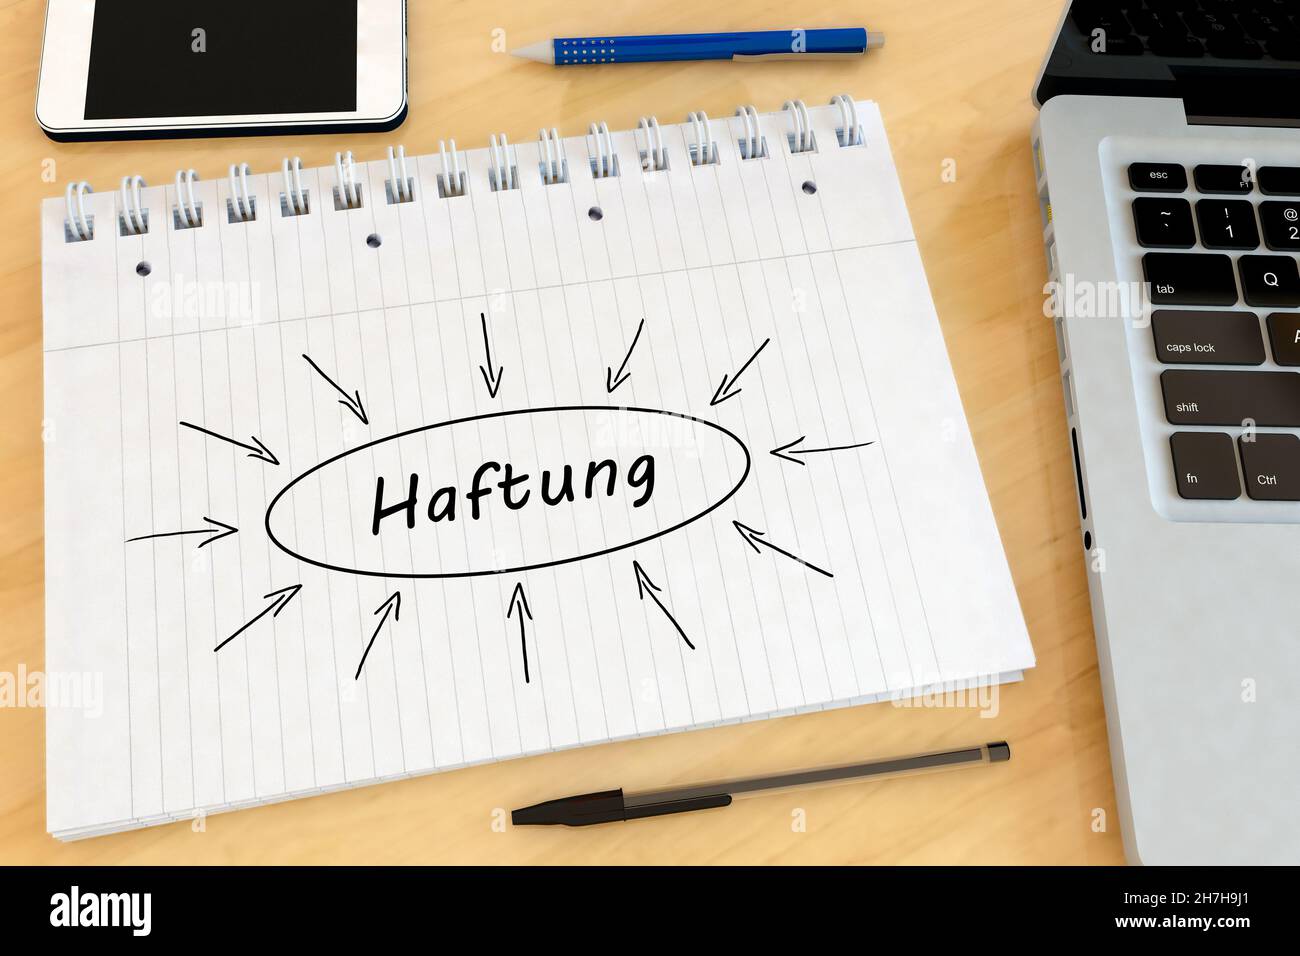 Haftung - german word for liability - handwritten text in a notebook on a desk - 3d render illustration. Stock Photo